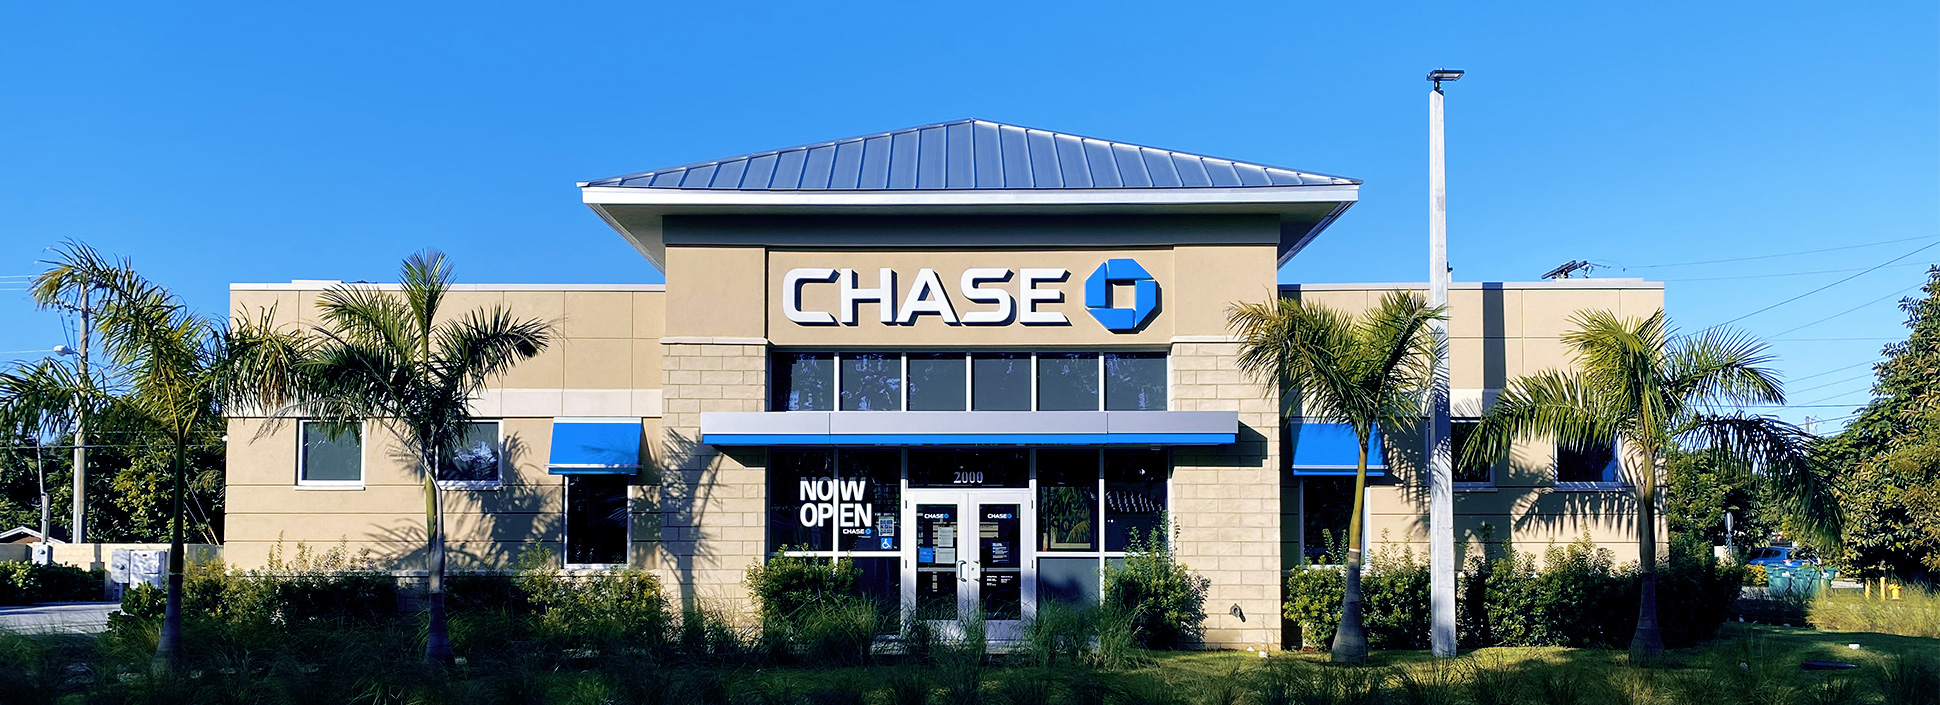 what time does chase close on saturday